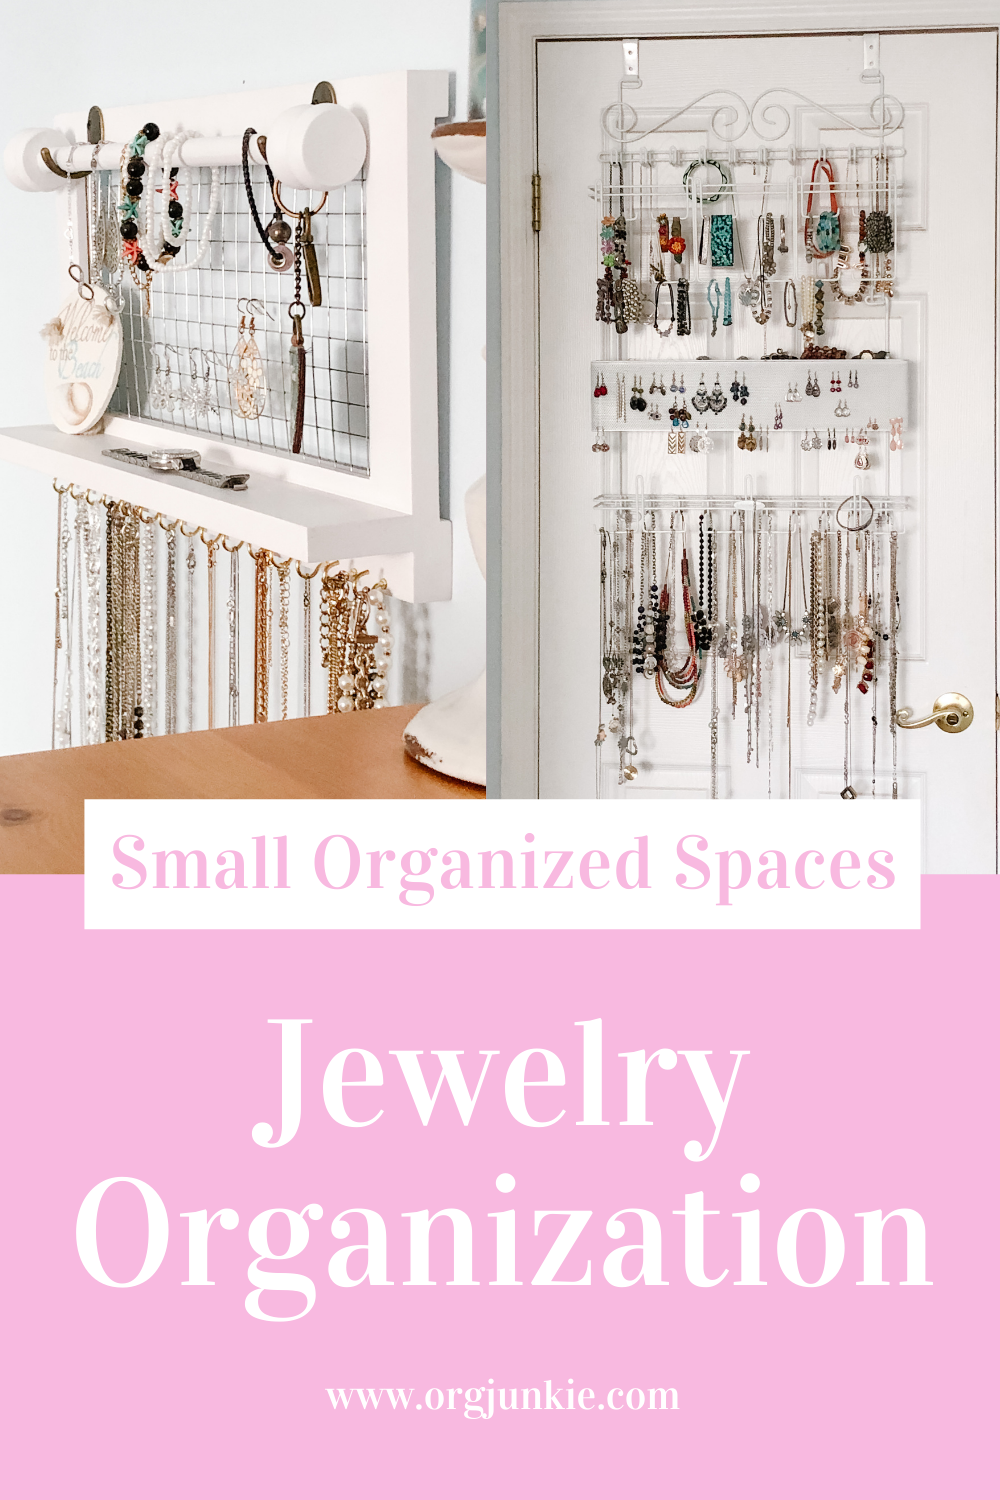 Small Organized Spaces: Jewelry Organization Solutions at I'm an Organizing Junkie blog